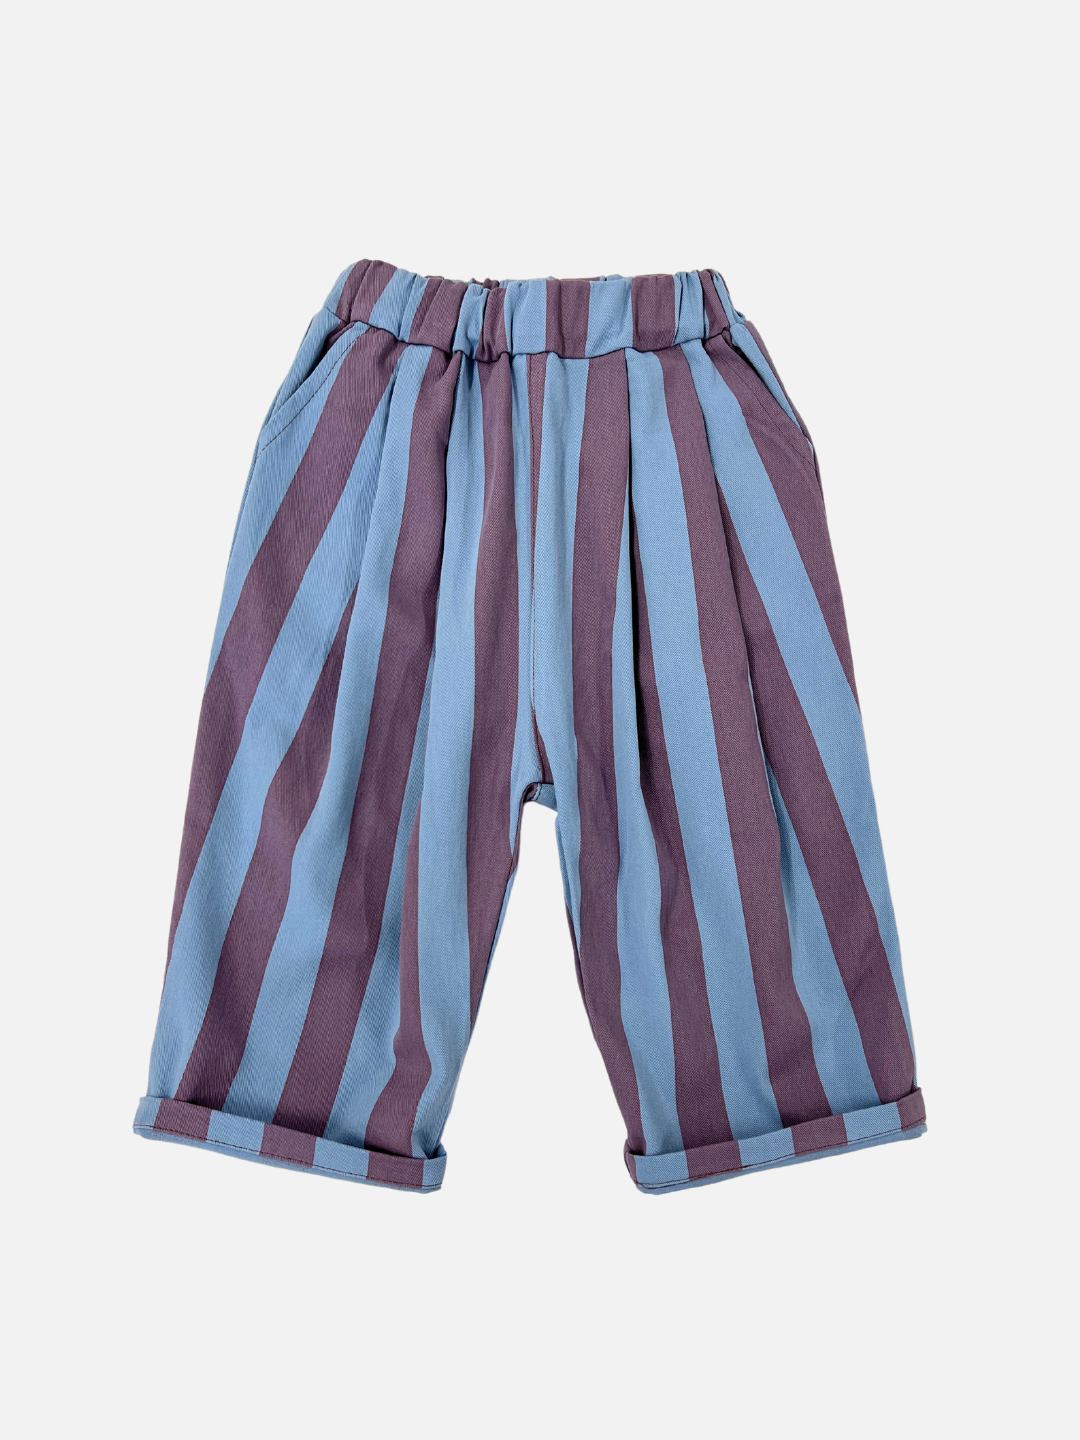 Front view of kids baggy pants in blue with wide purple vertical stripes.